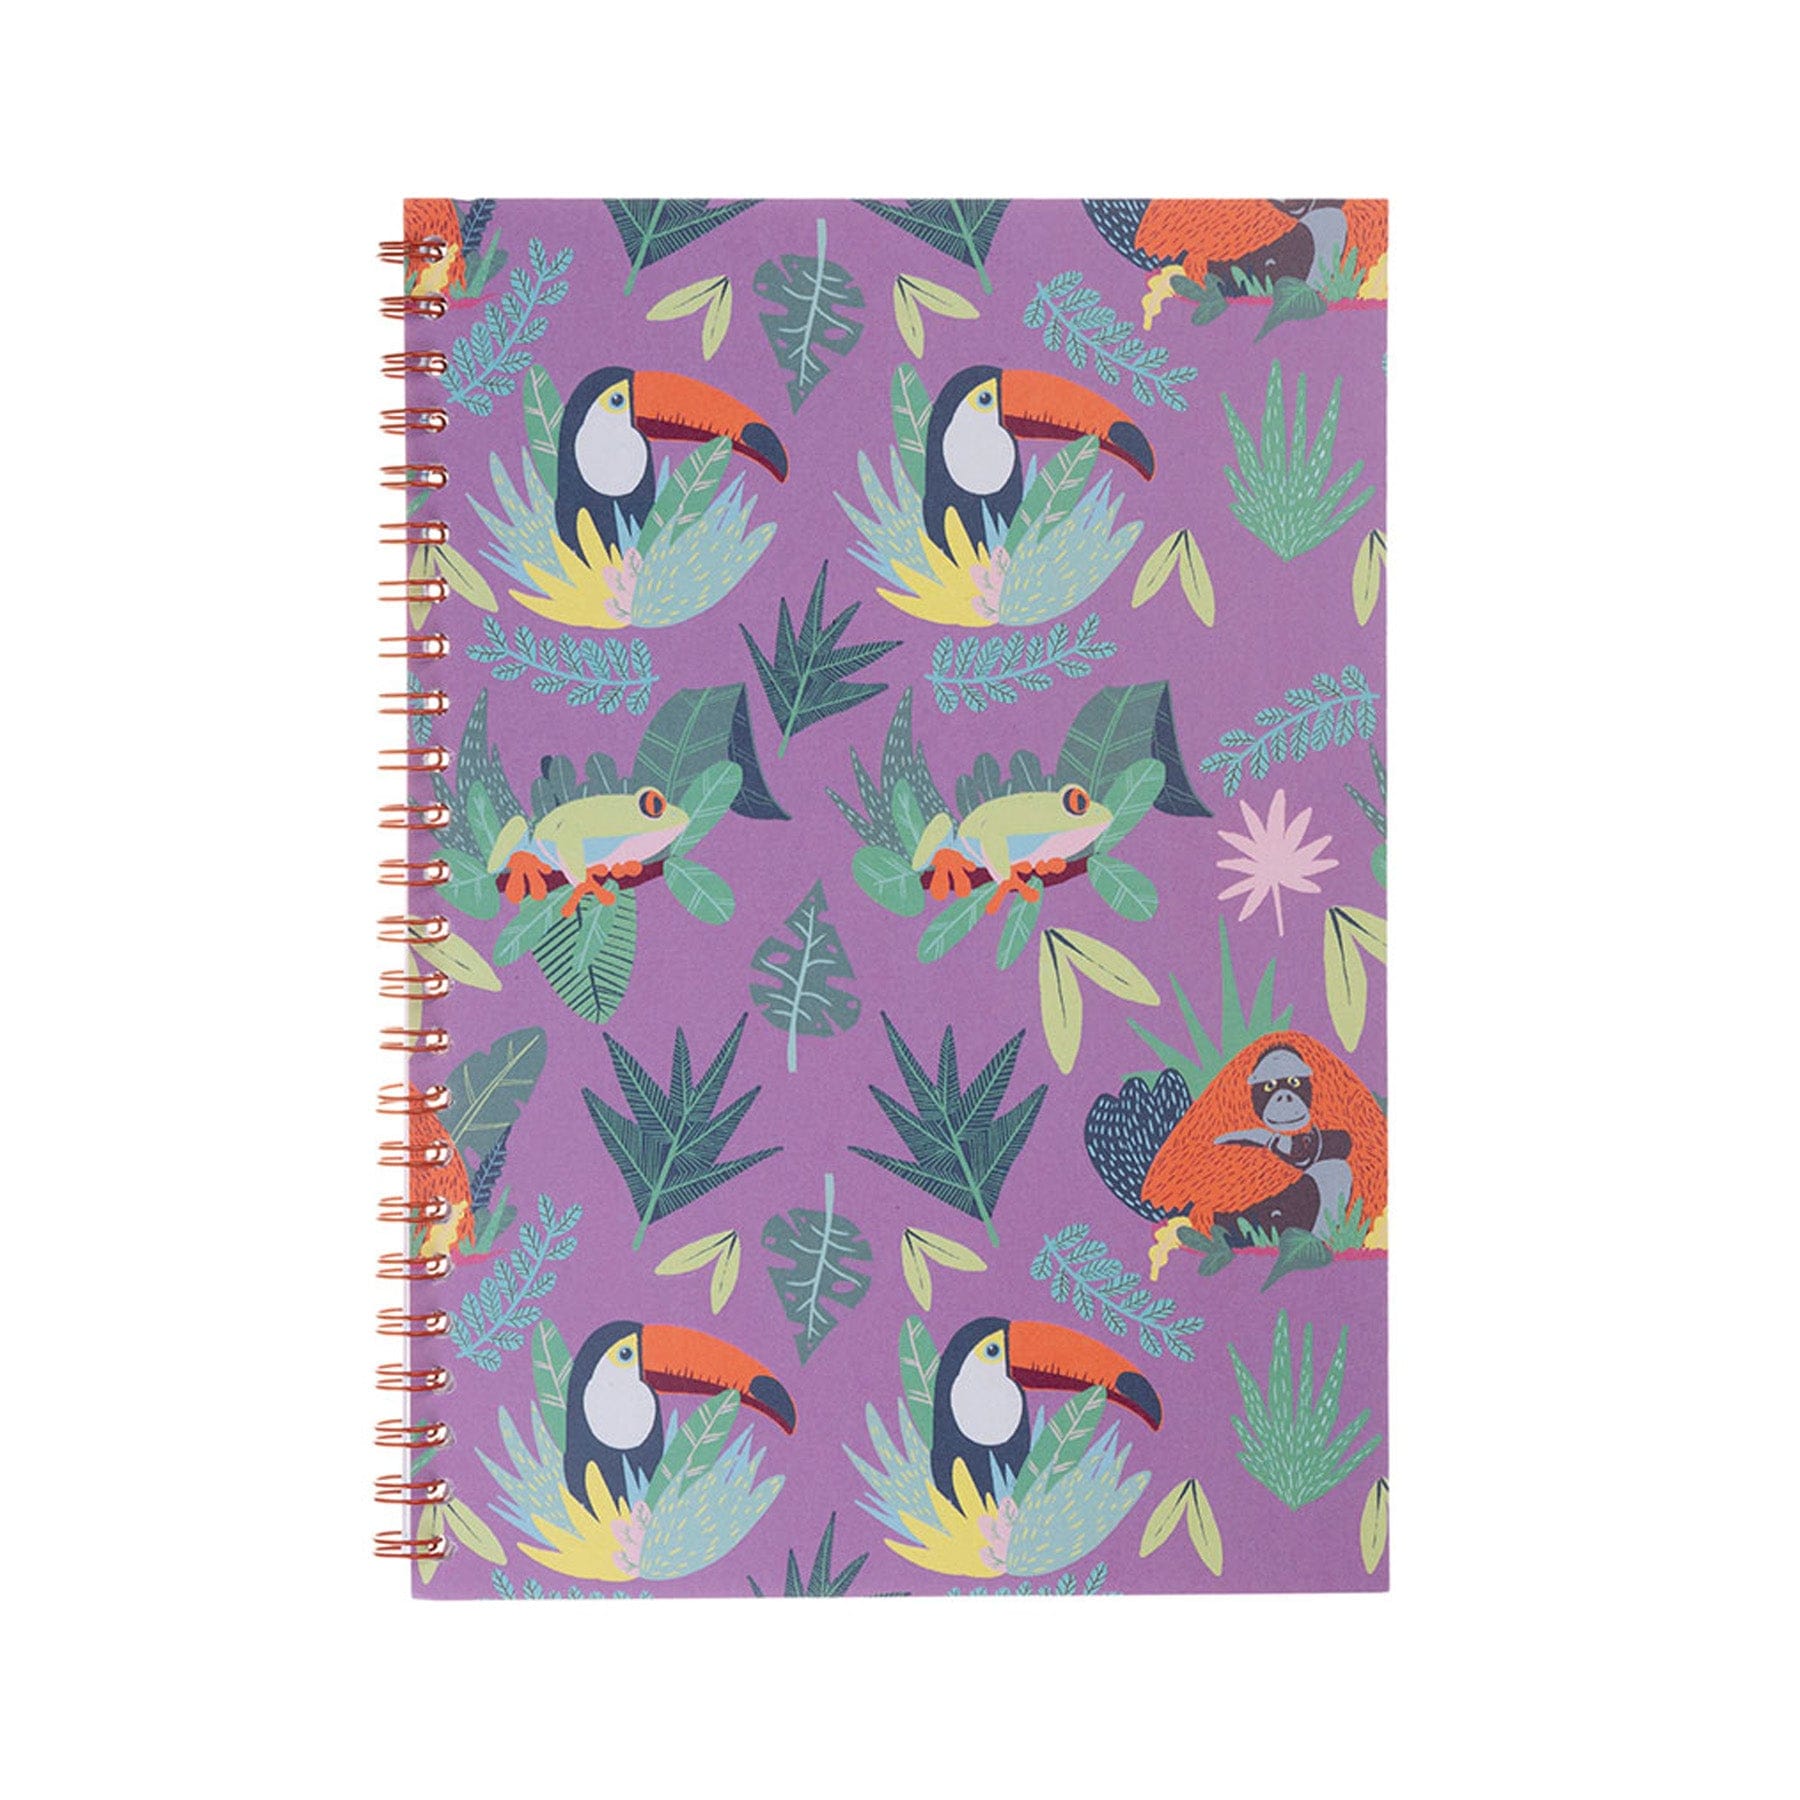 Spiral-bound notebook with tropical toucan and frog pattern on a purple background, featuring green foliage and exotic flowers design, office supplies, stationery.